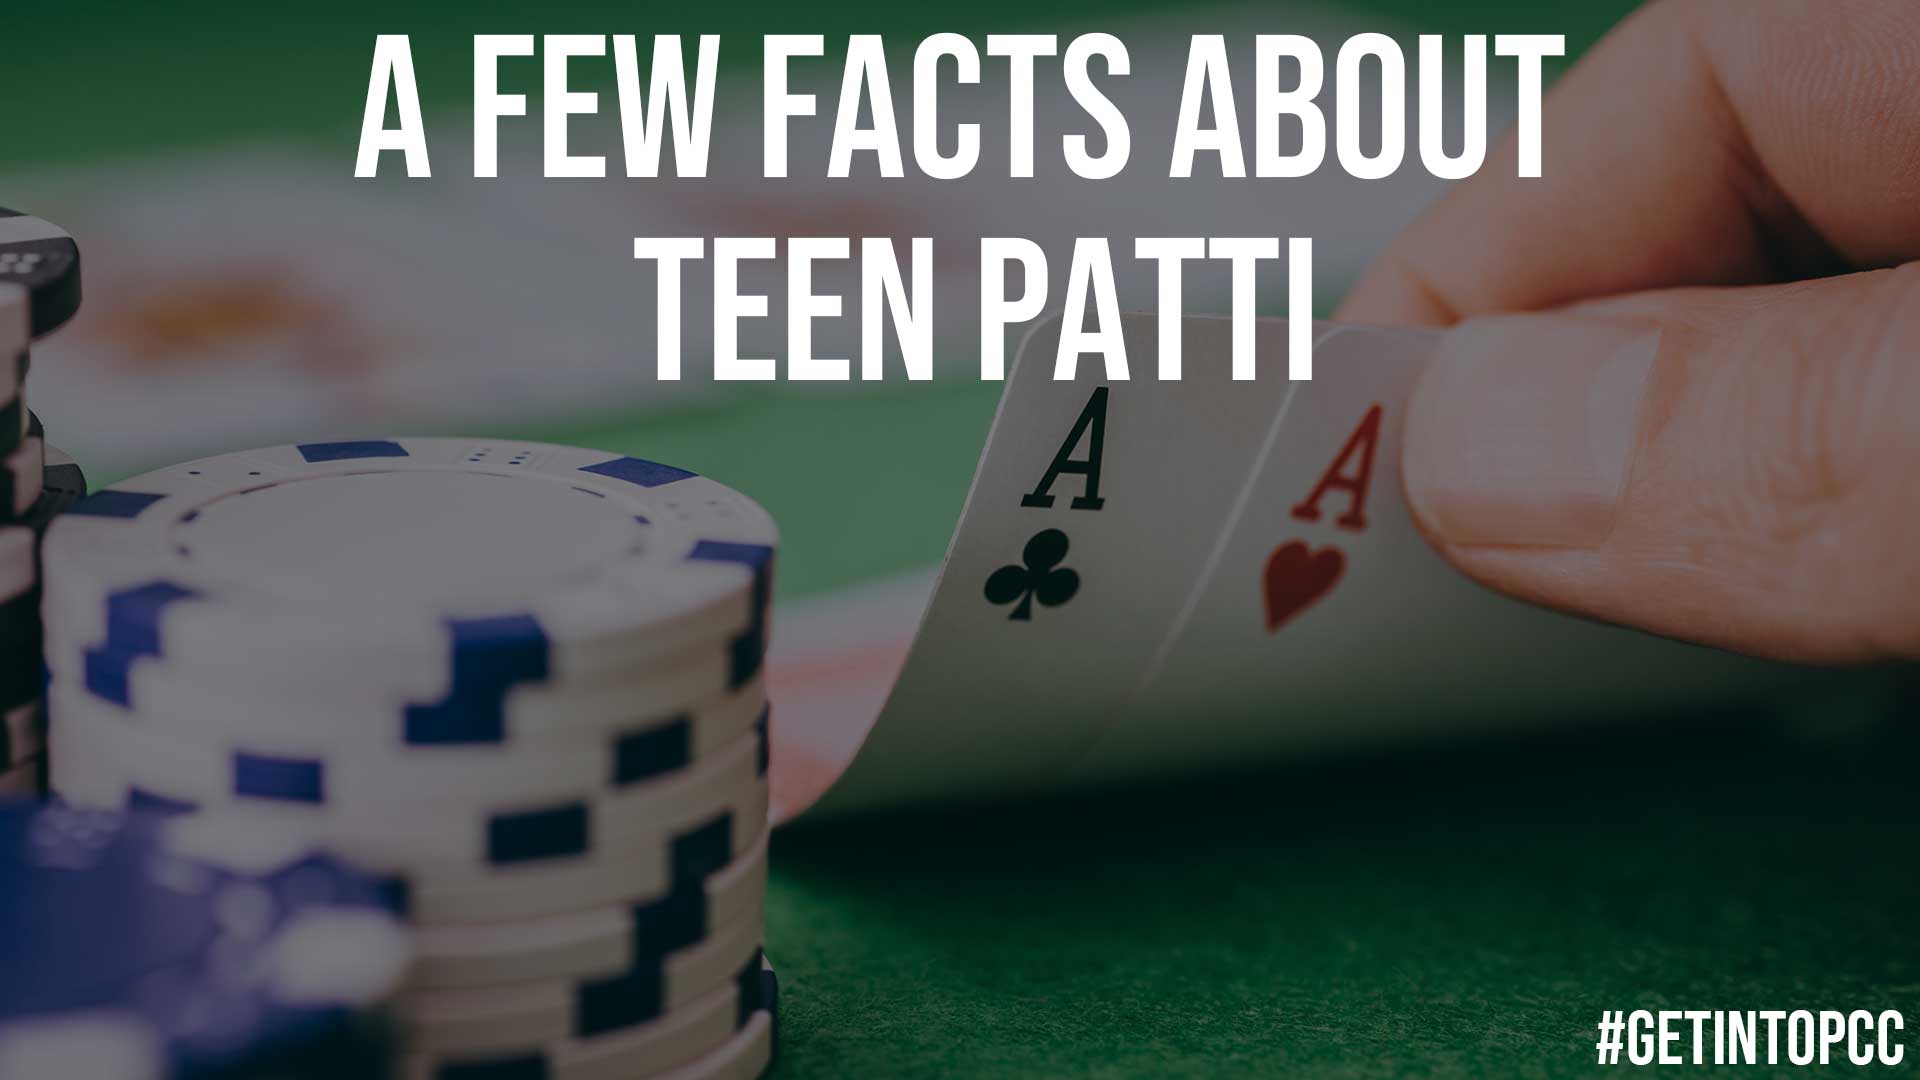 A Few Facts About Teen Patti